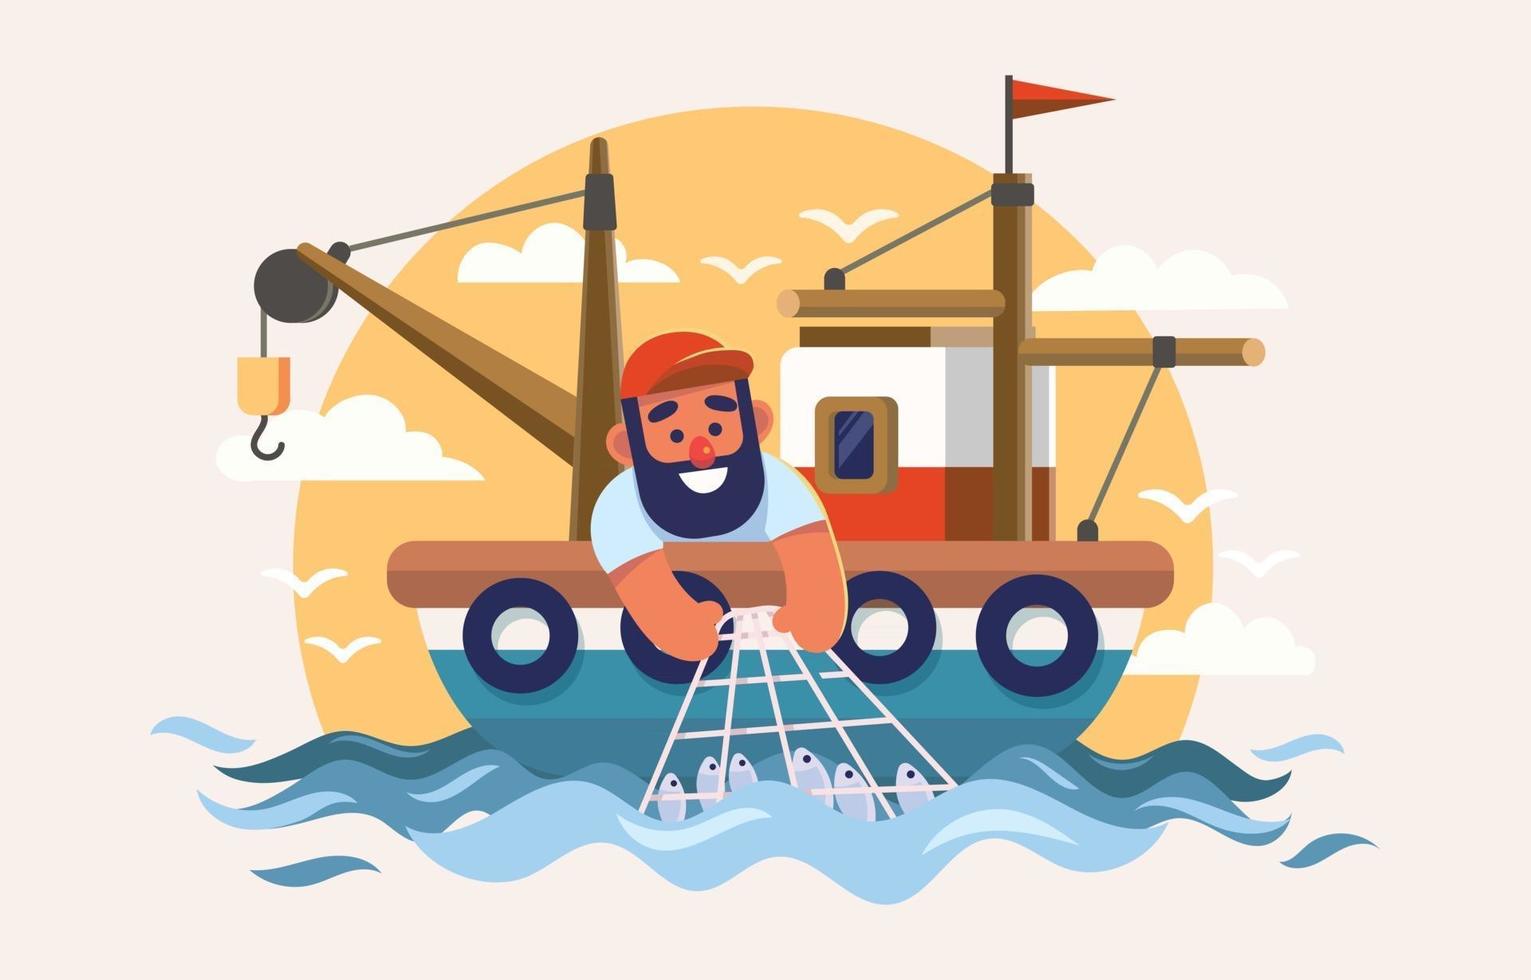 Fisherman in Boat Catch a Lot Fish vector